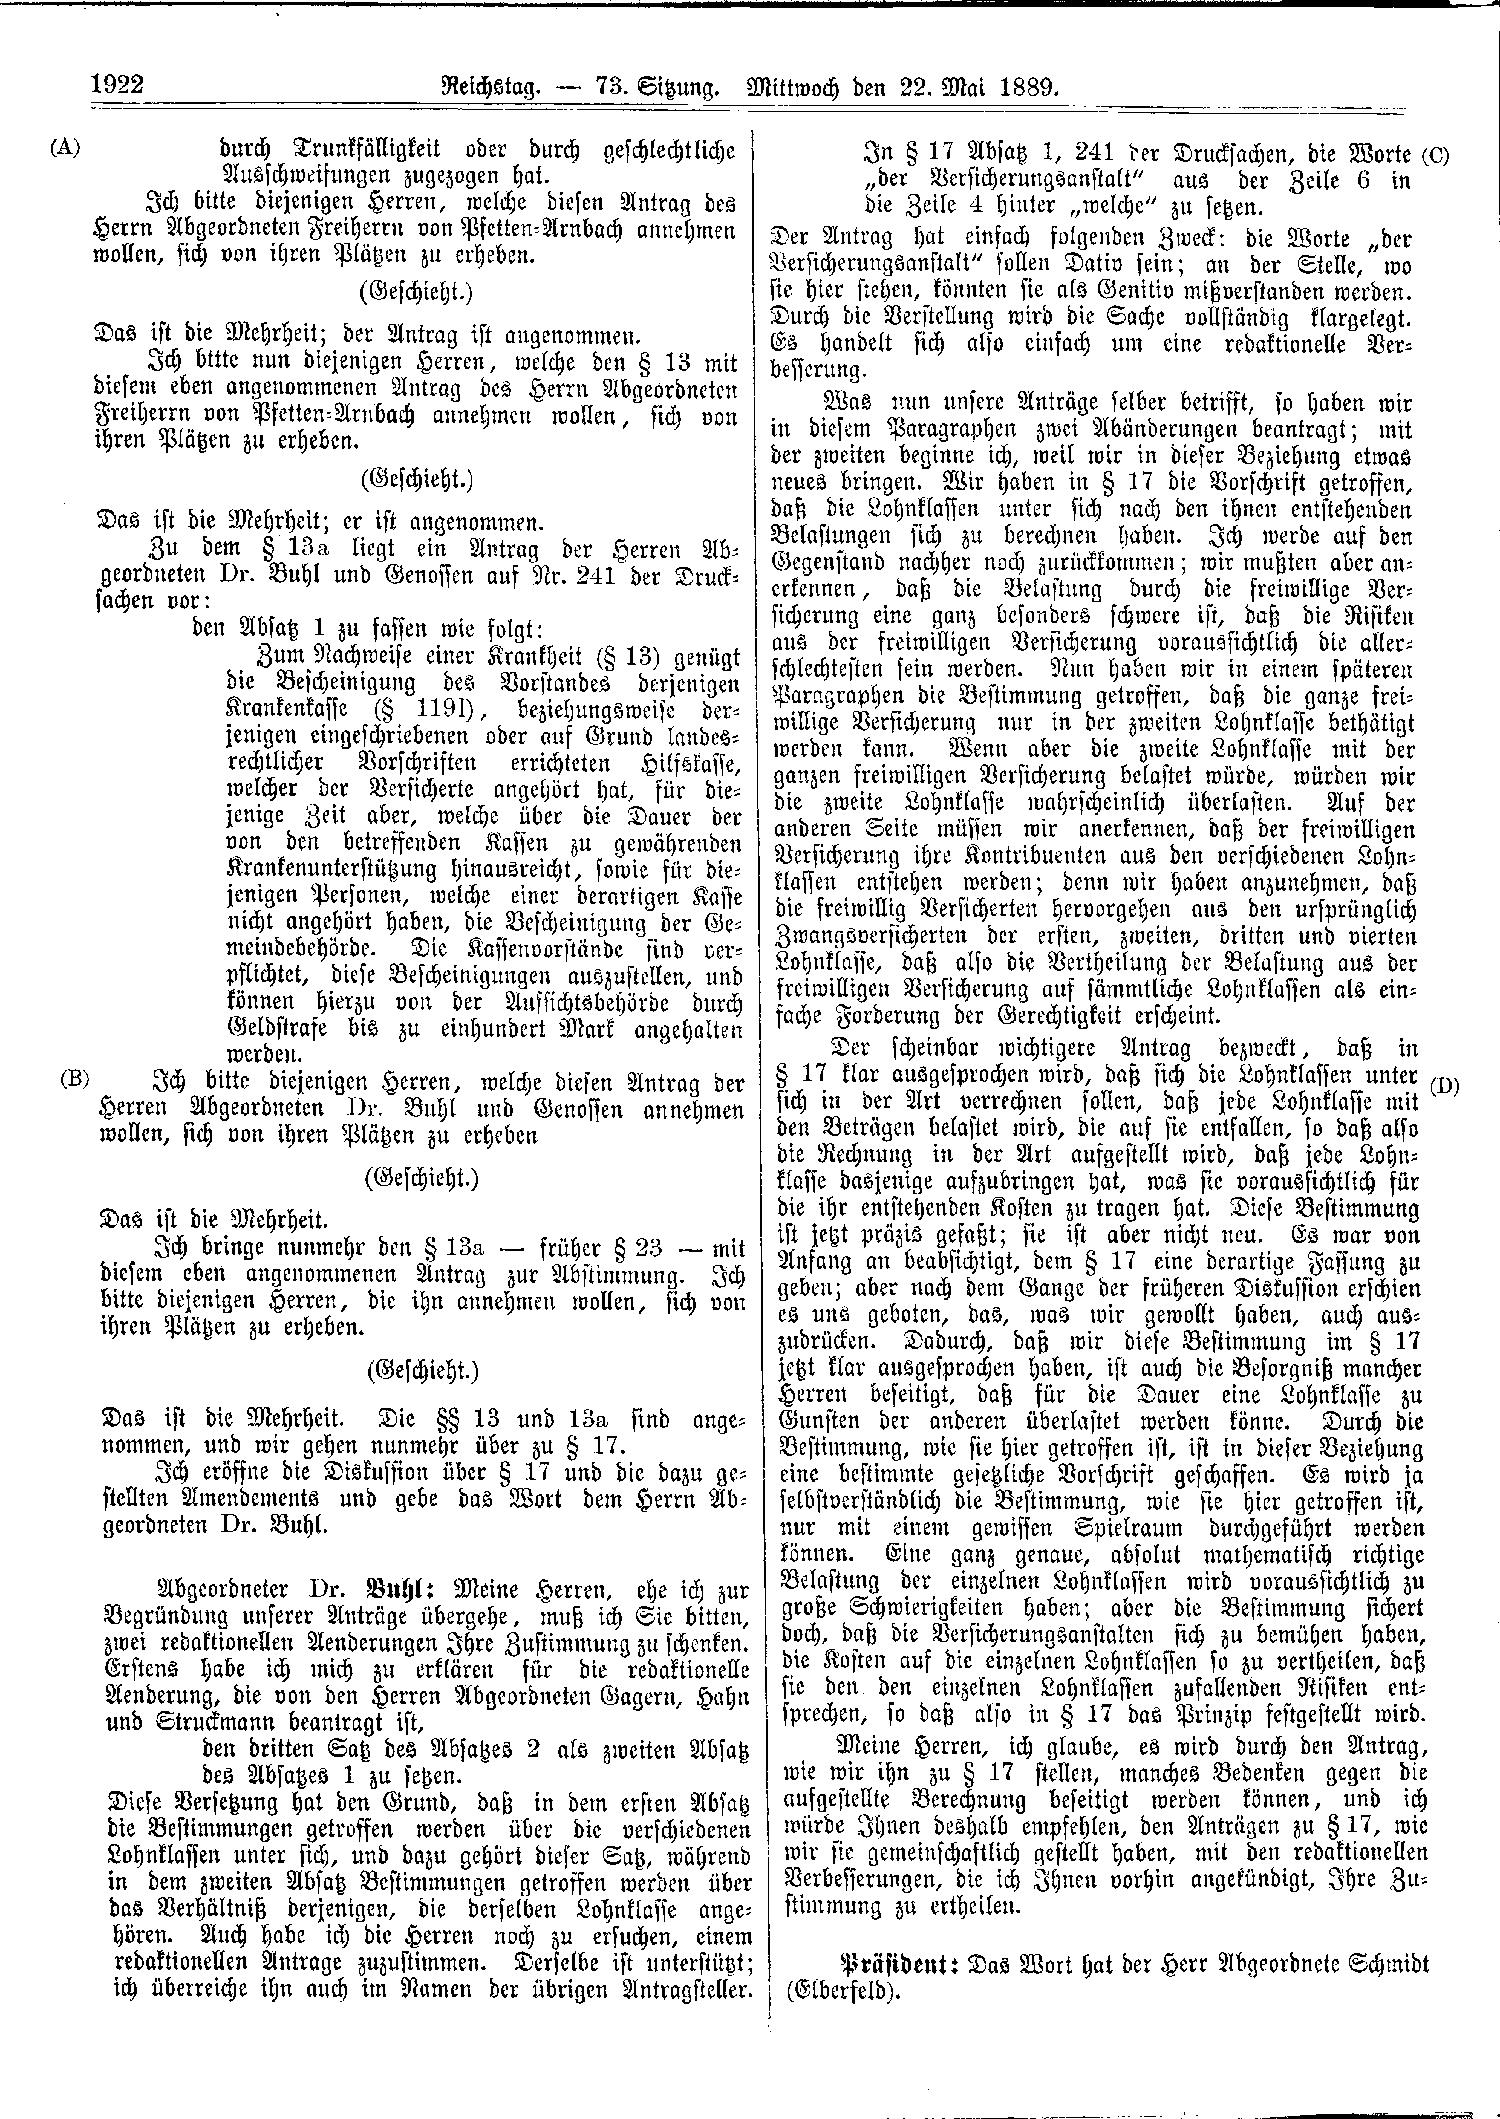 Scan of page 1922